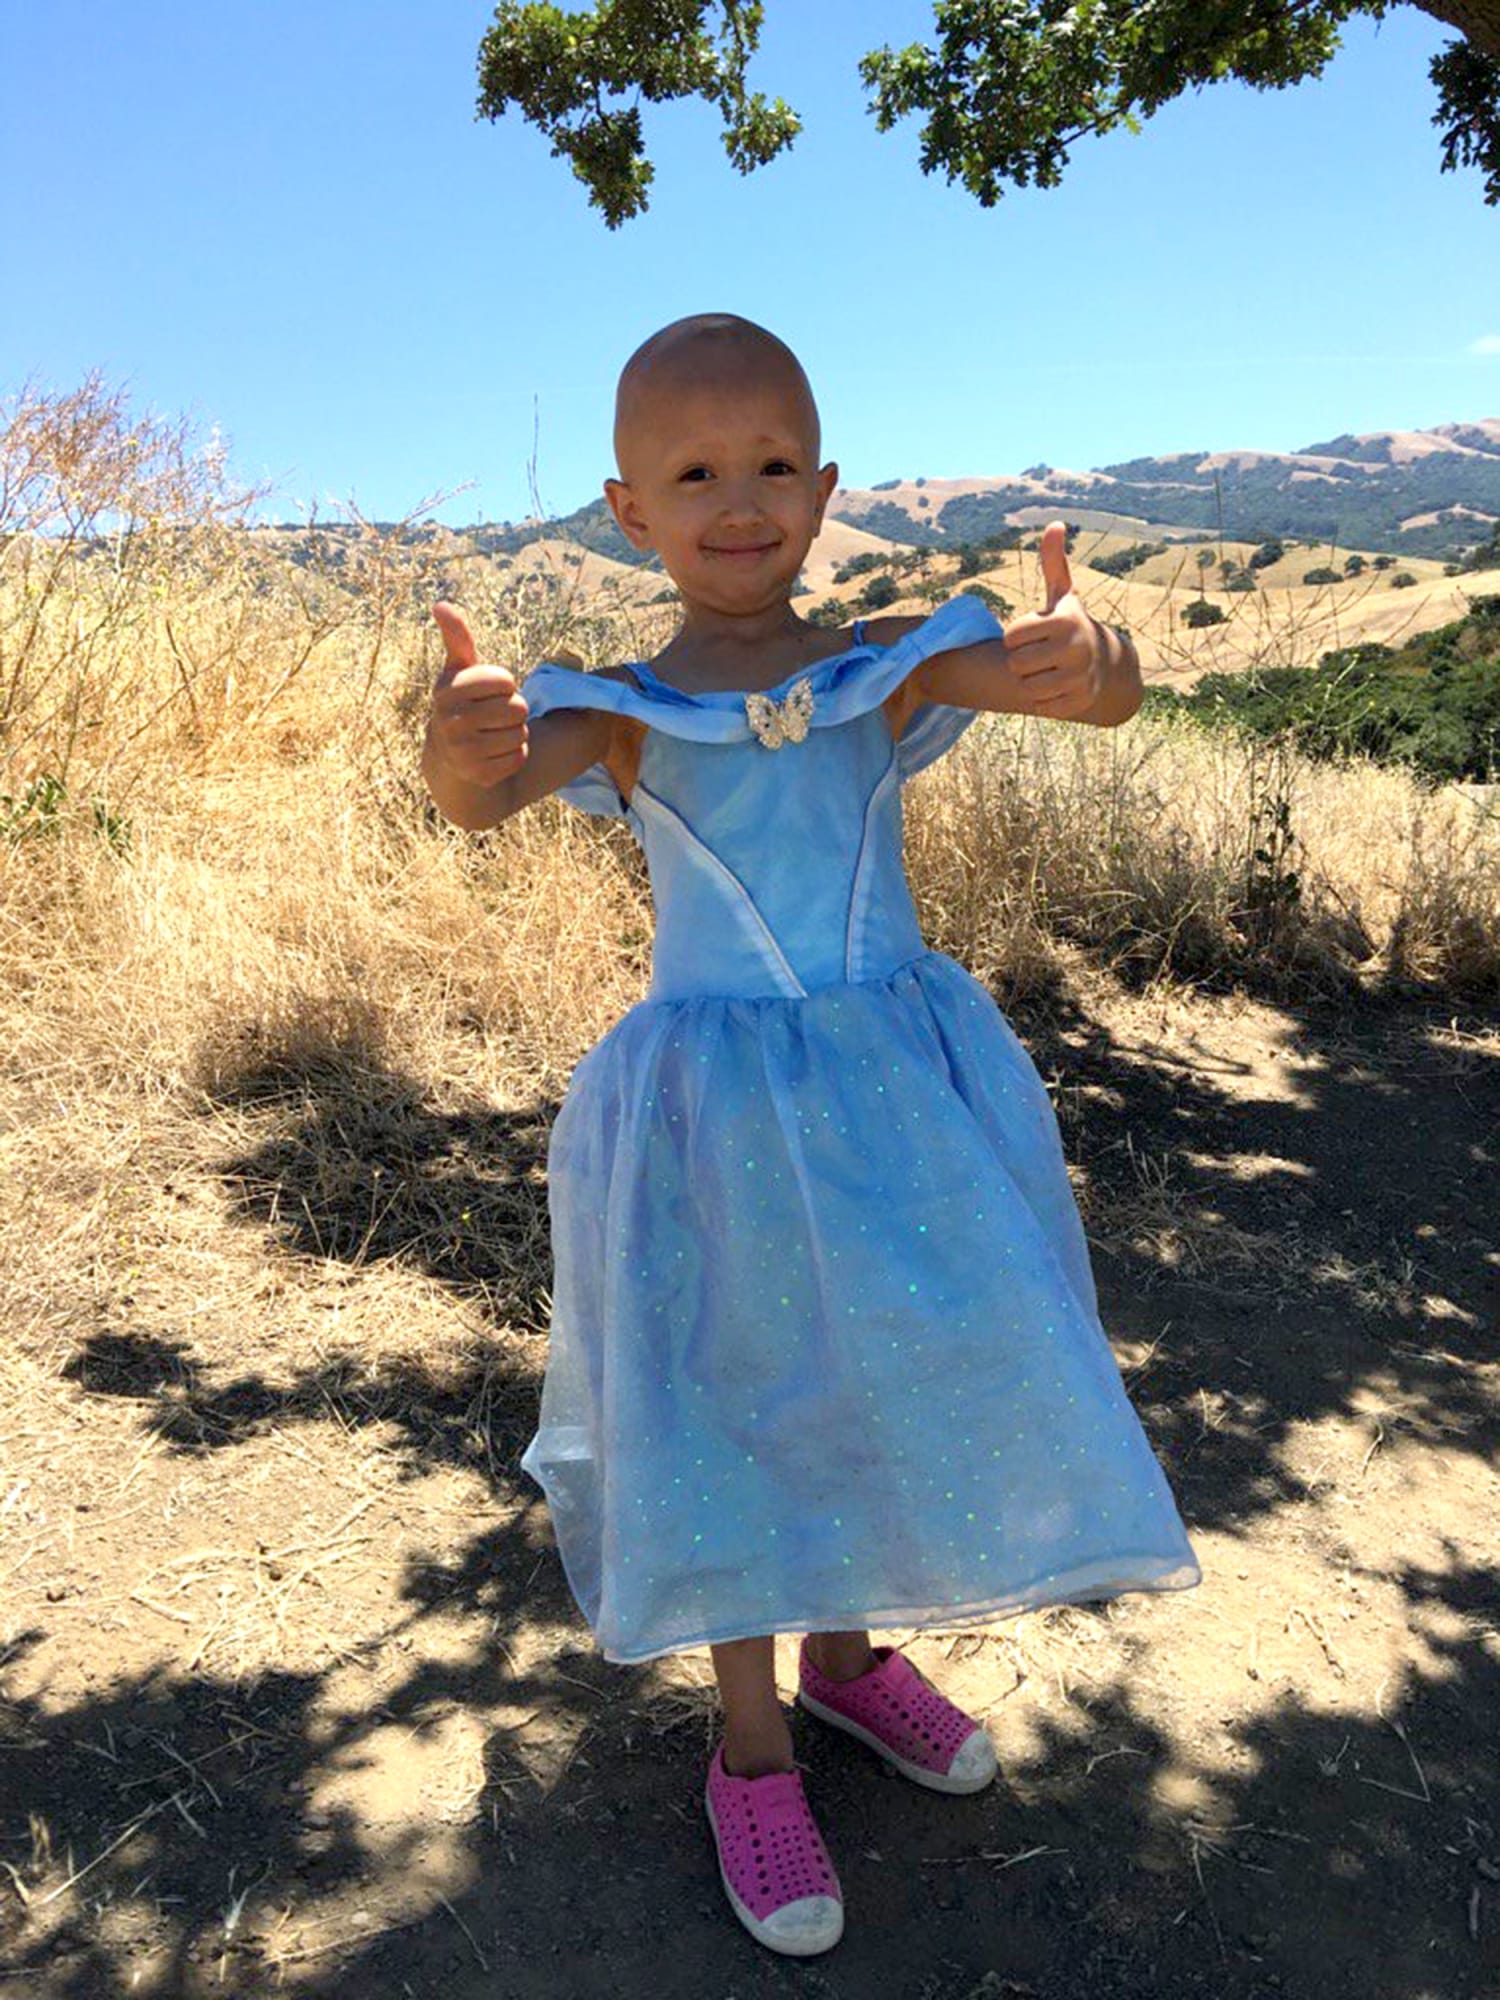 Meet the 4-year-old fashion designer with alopecia who's making